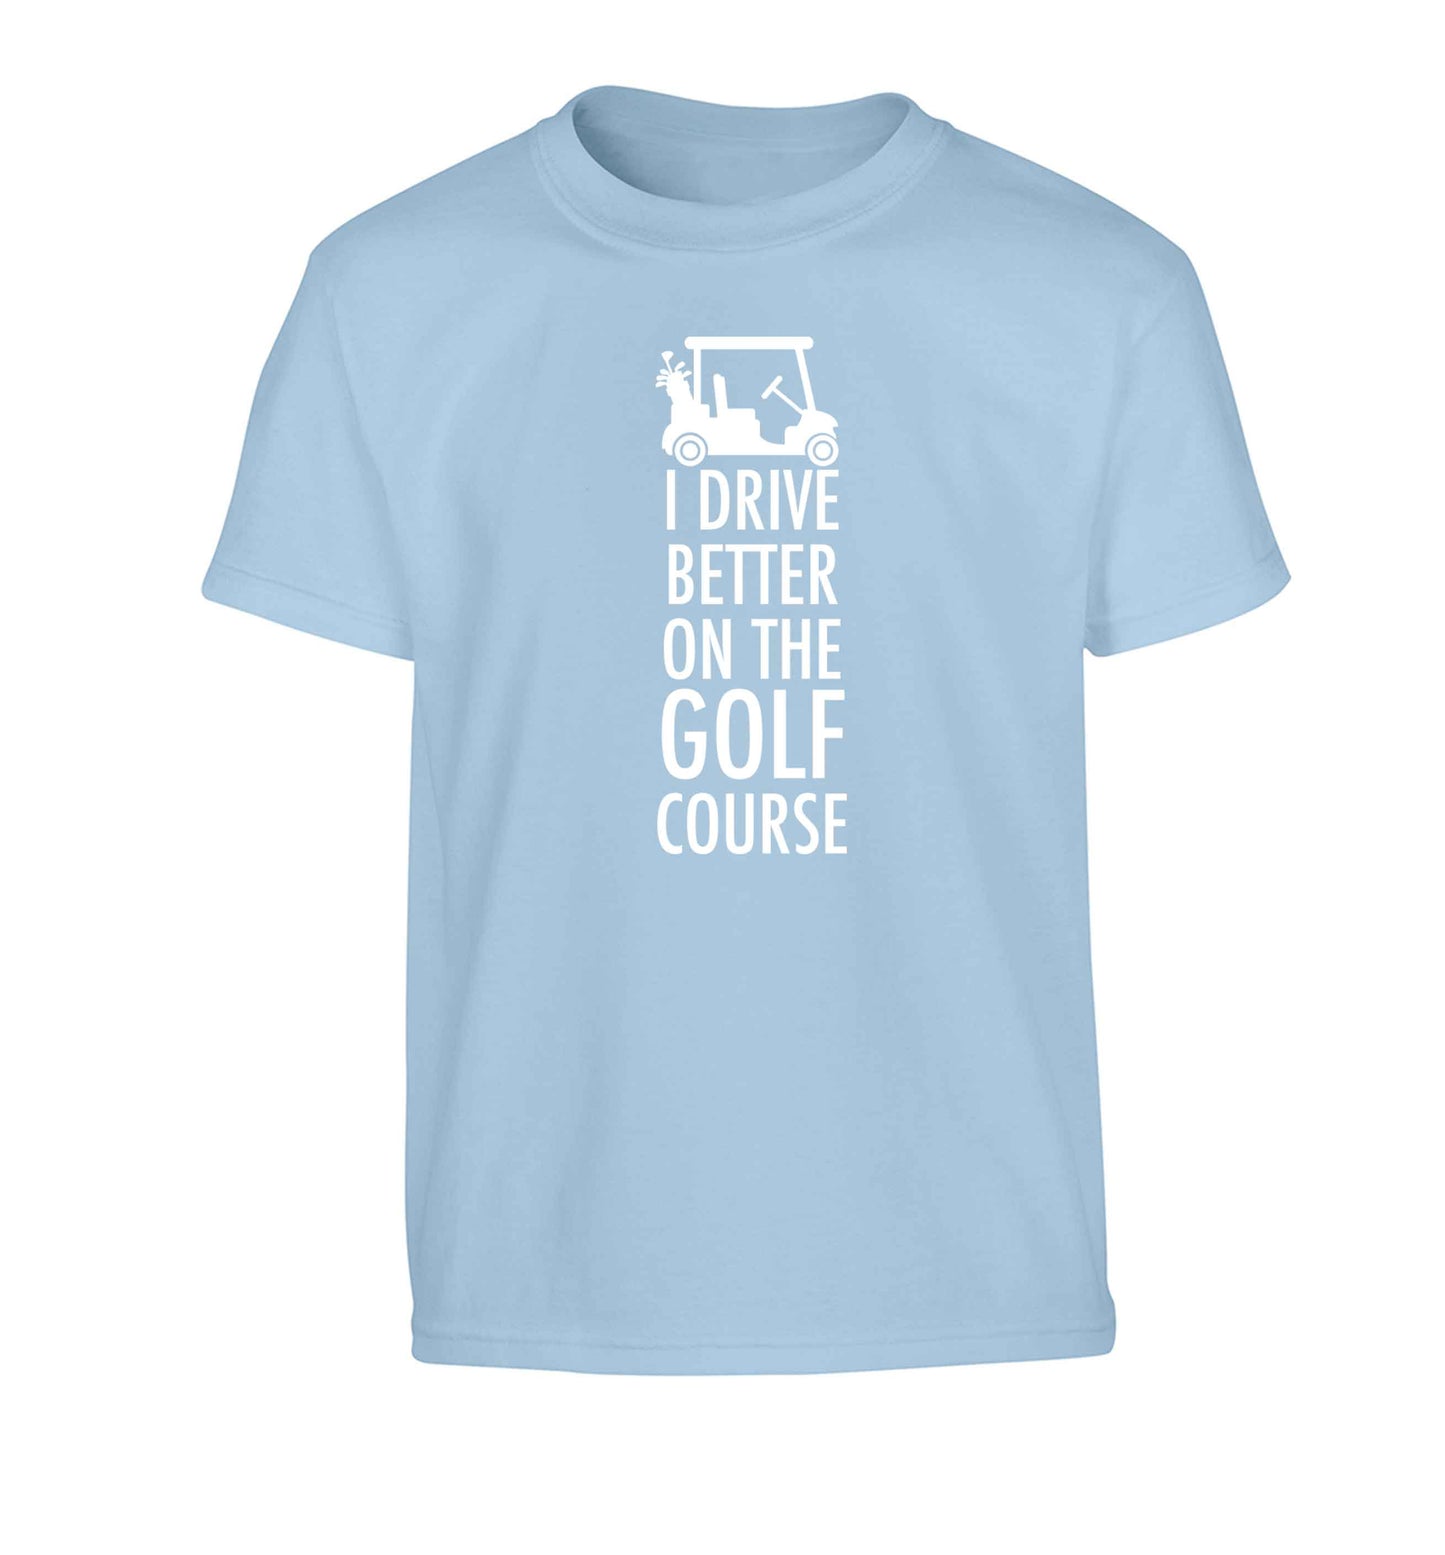 I drive better on the golf course Children's light blue Tshirt 12-13 Years